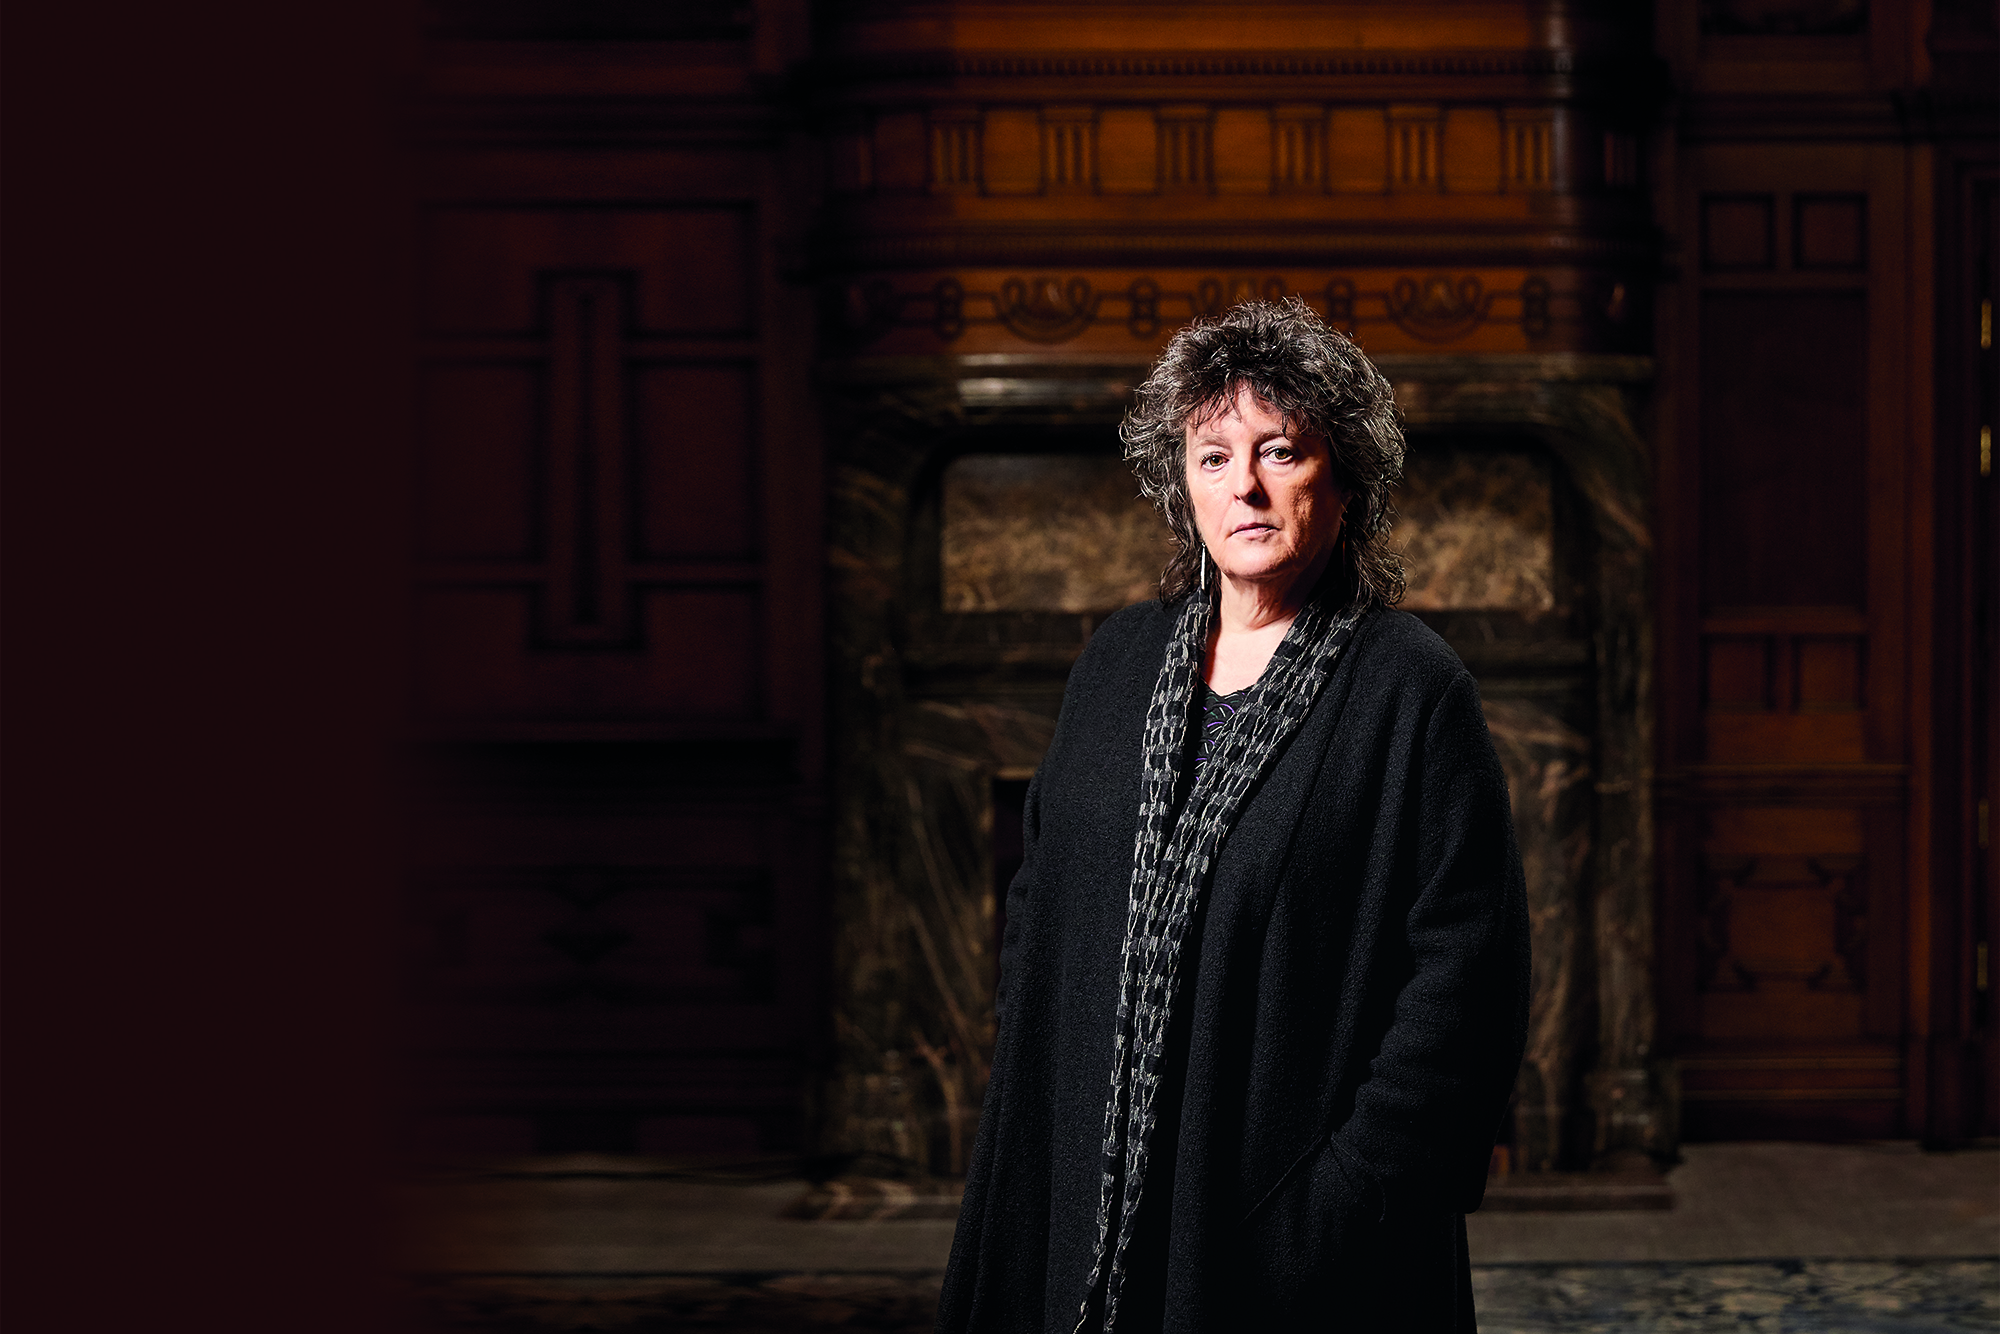 Professor Carol Ann Duffy has spent ten years as Poet Laureate, and over 20 as the driving force behind Manchester Writing School